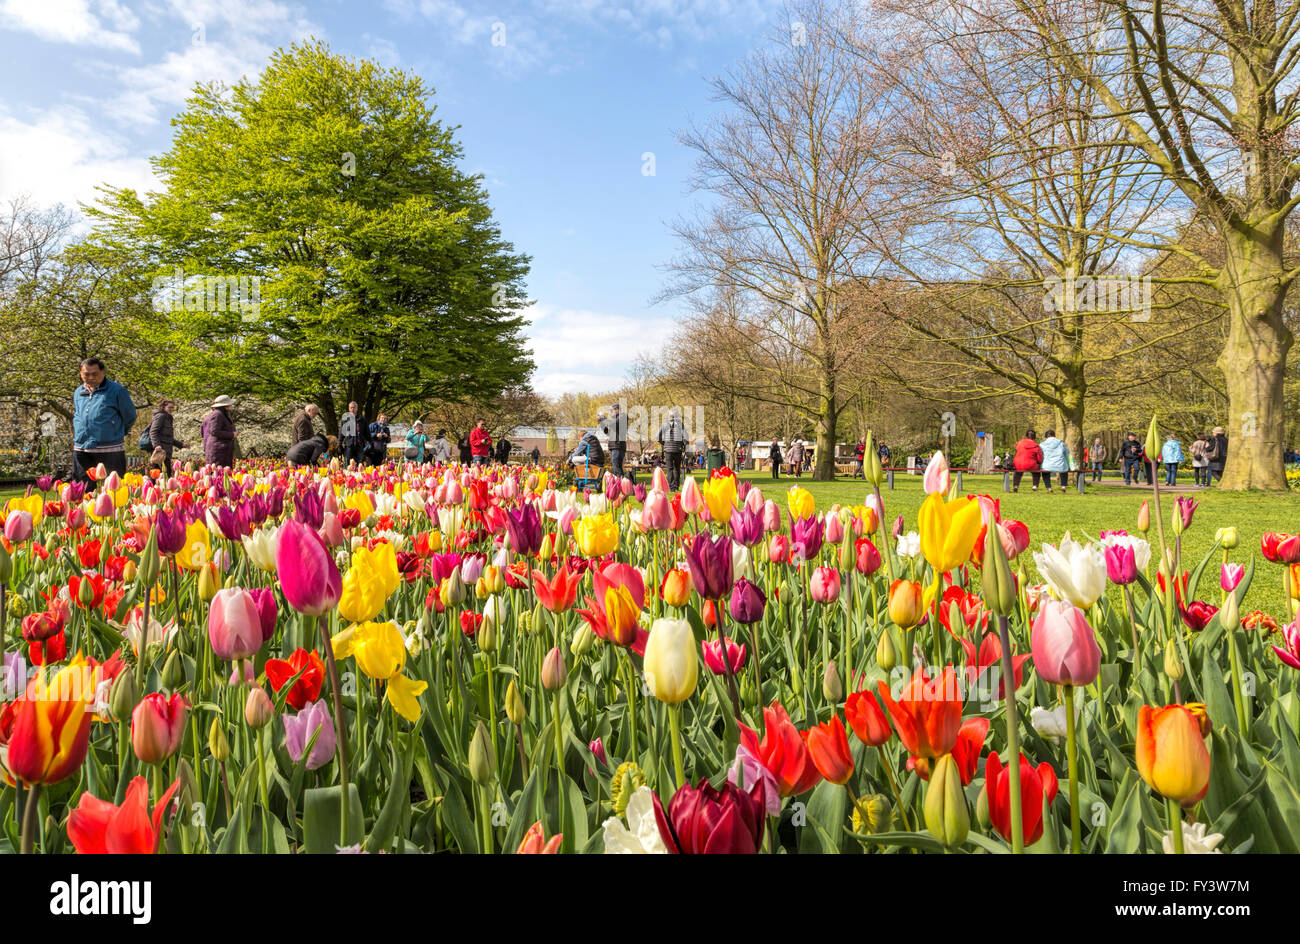 A riot of color in spring at the famous Keukenhof, one of the world's largest flower gardens, Lisse, South Holland, Netherlands. Stock Photo